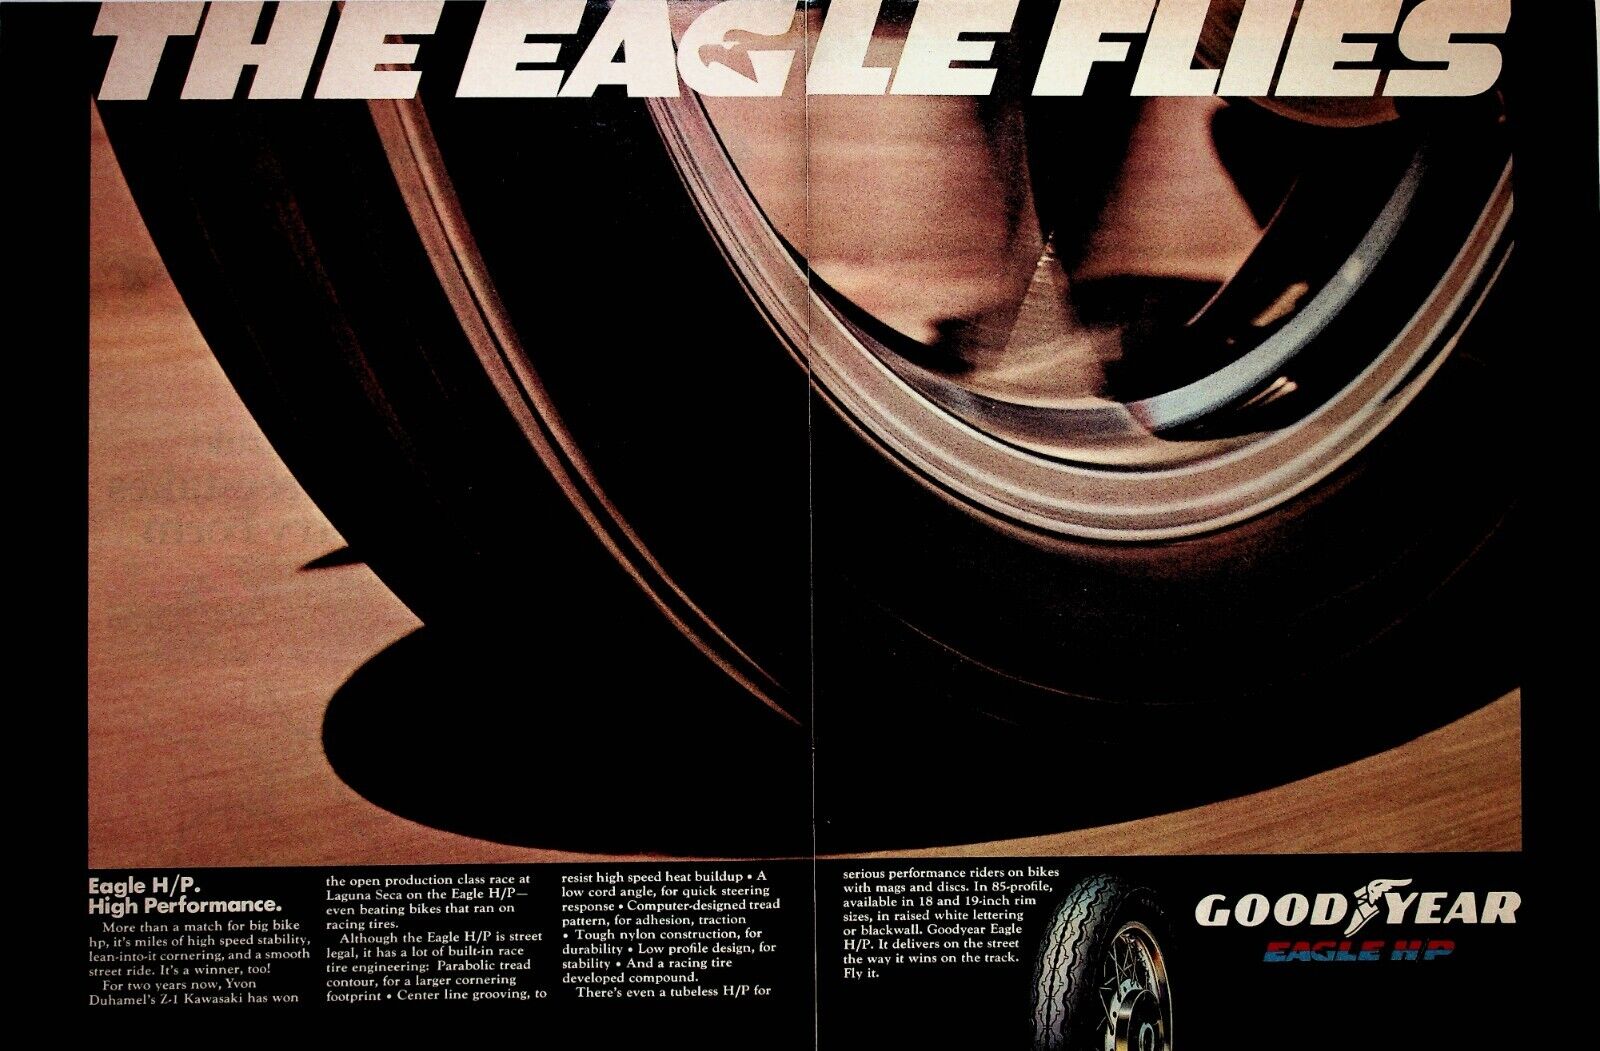 1976 Goodyear Eagle High Performance Motorcycle Tires - 2-Page Vintage Ad